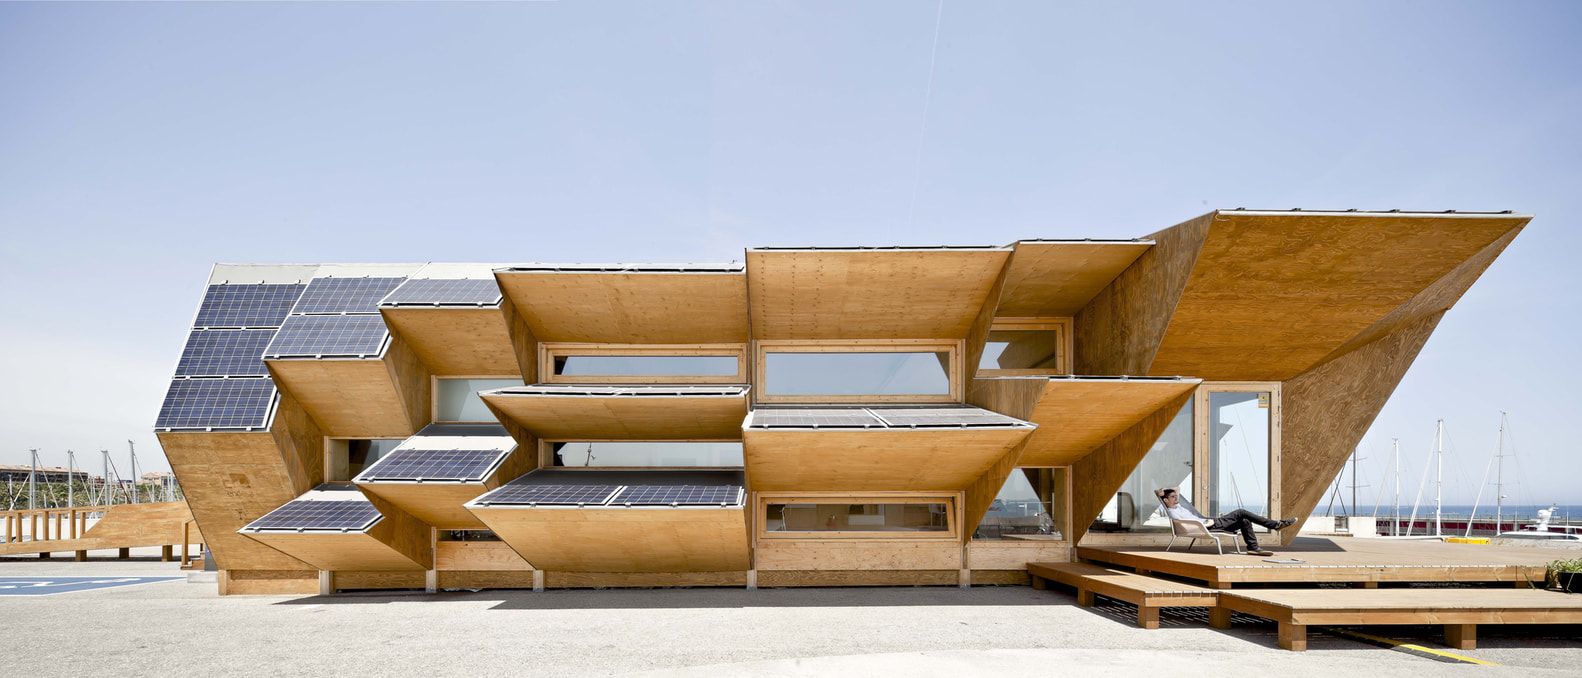 Endesa Pavilion on its site with a person resting on the front deck